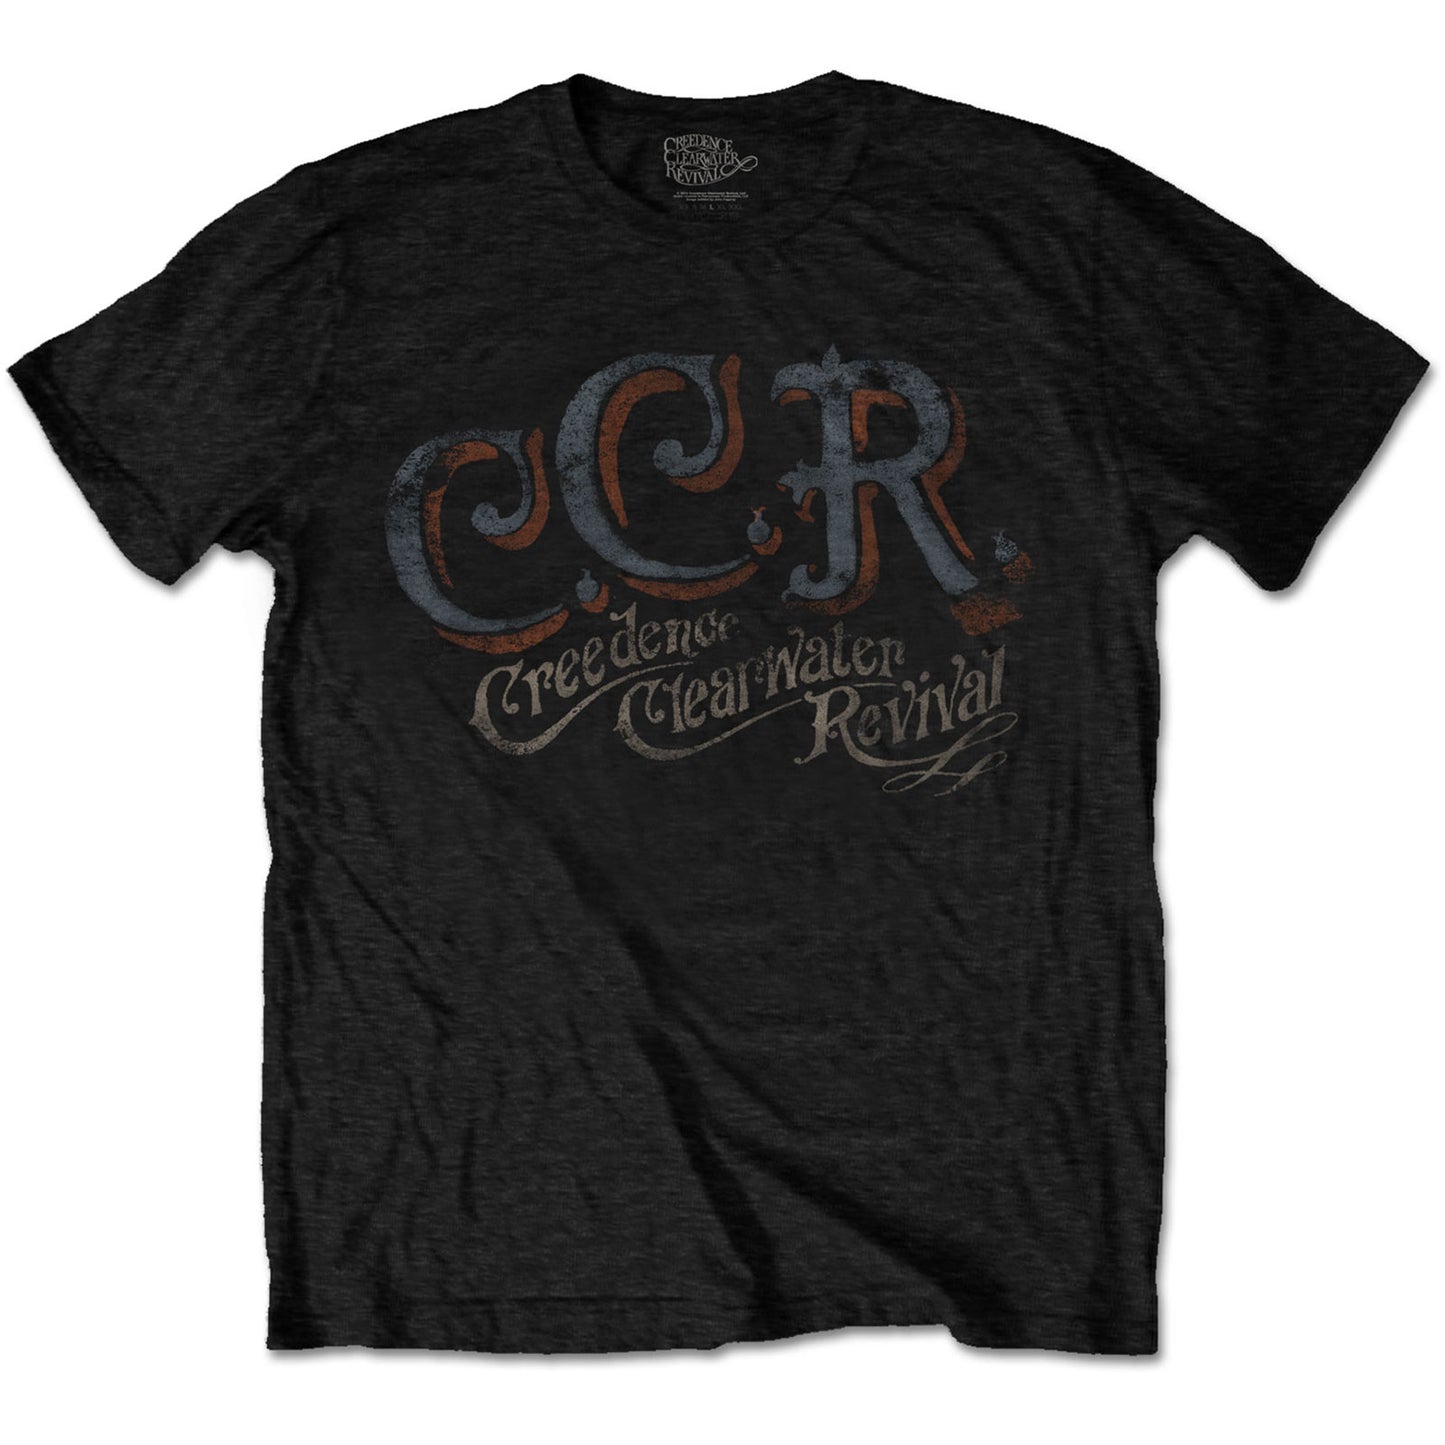 Creedence Clearwater Revival T-Shirt: CCR